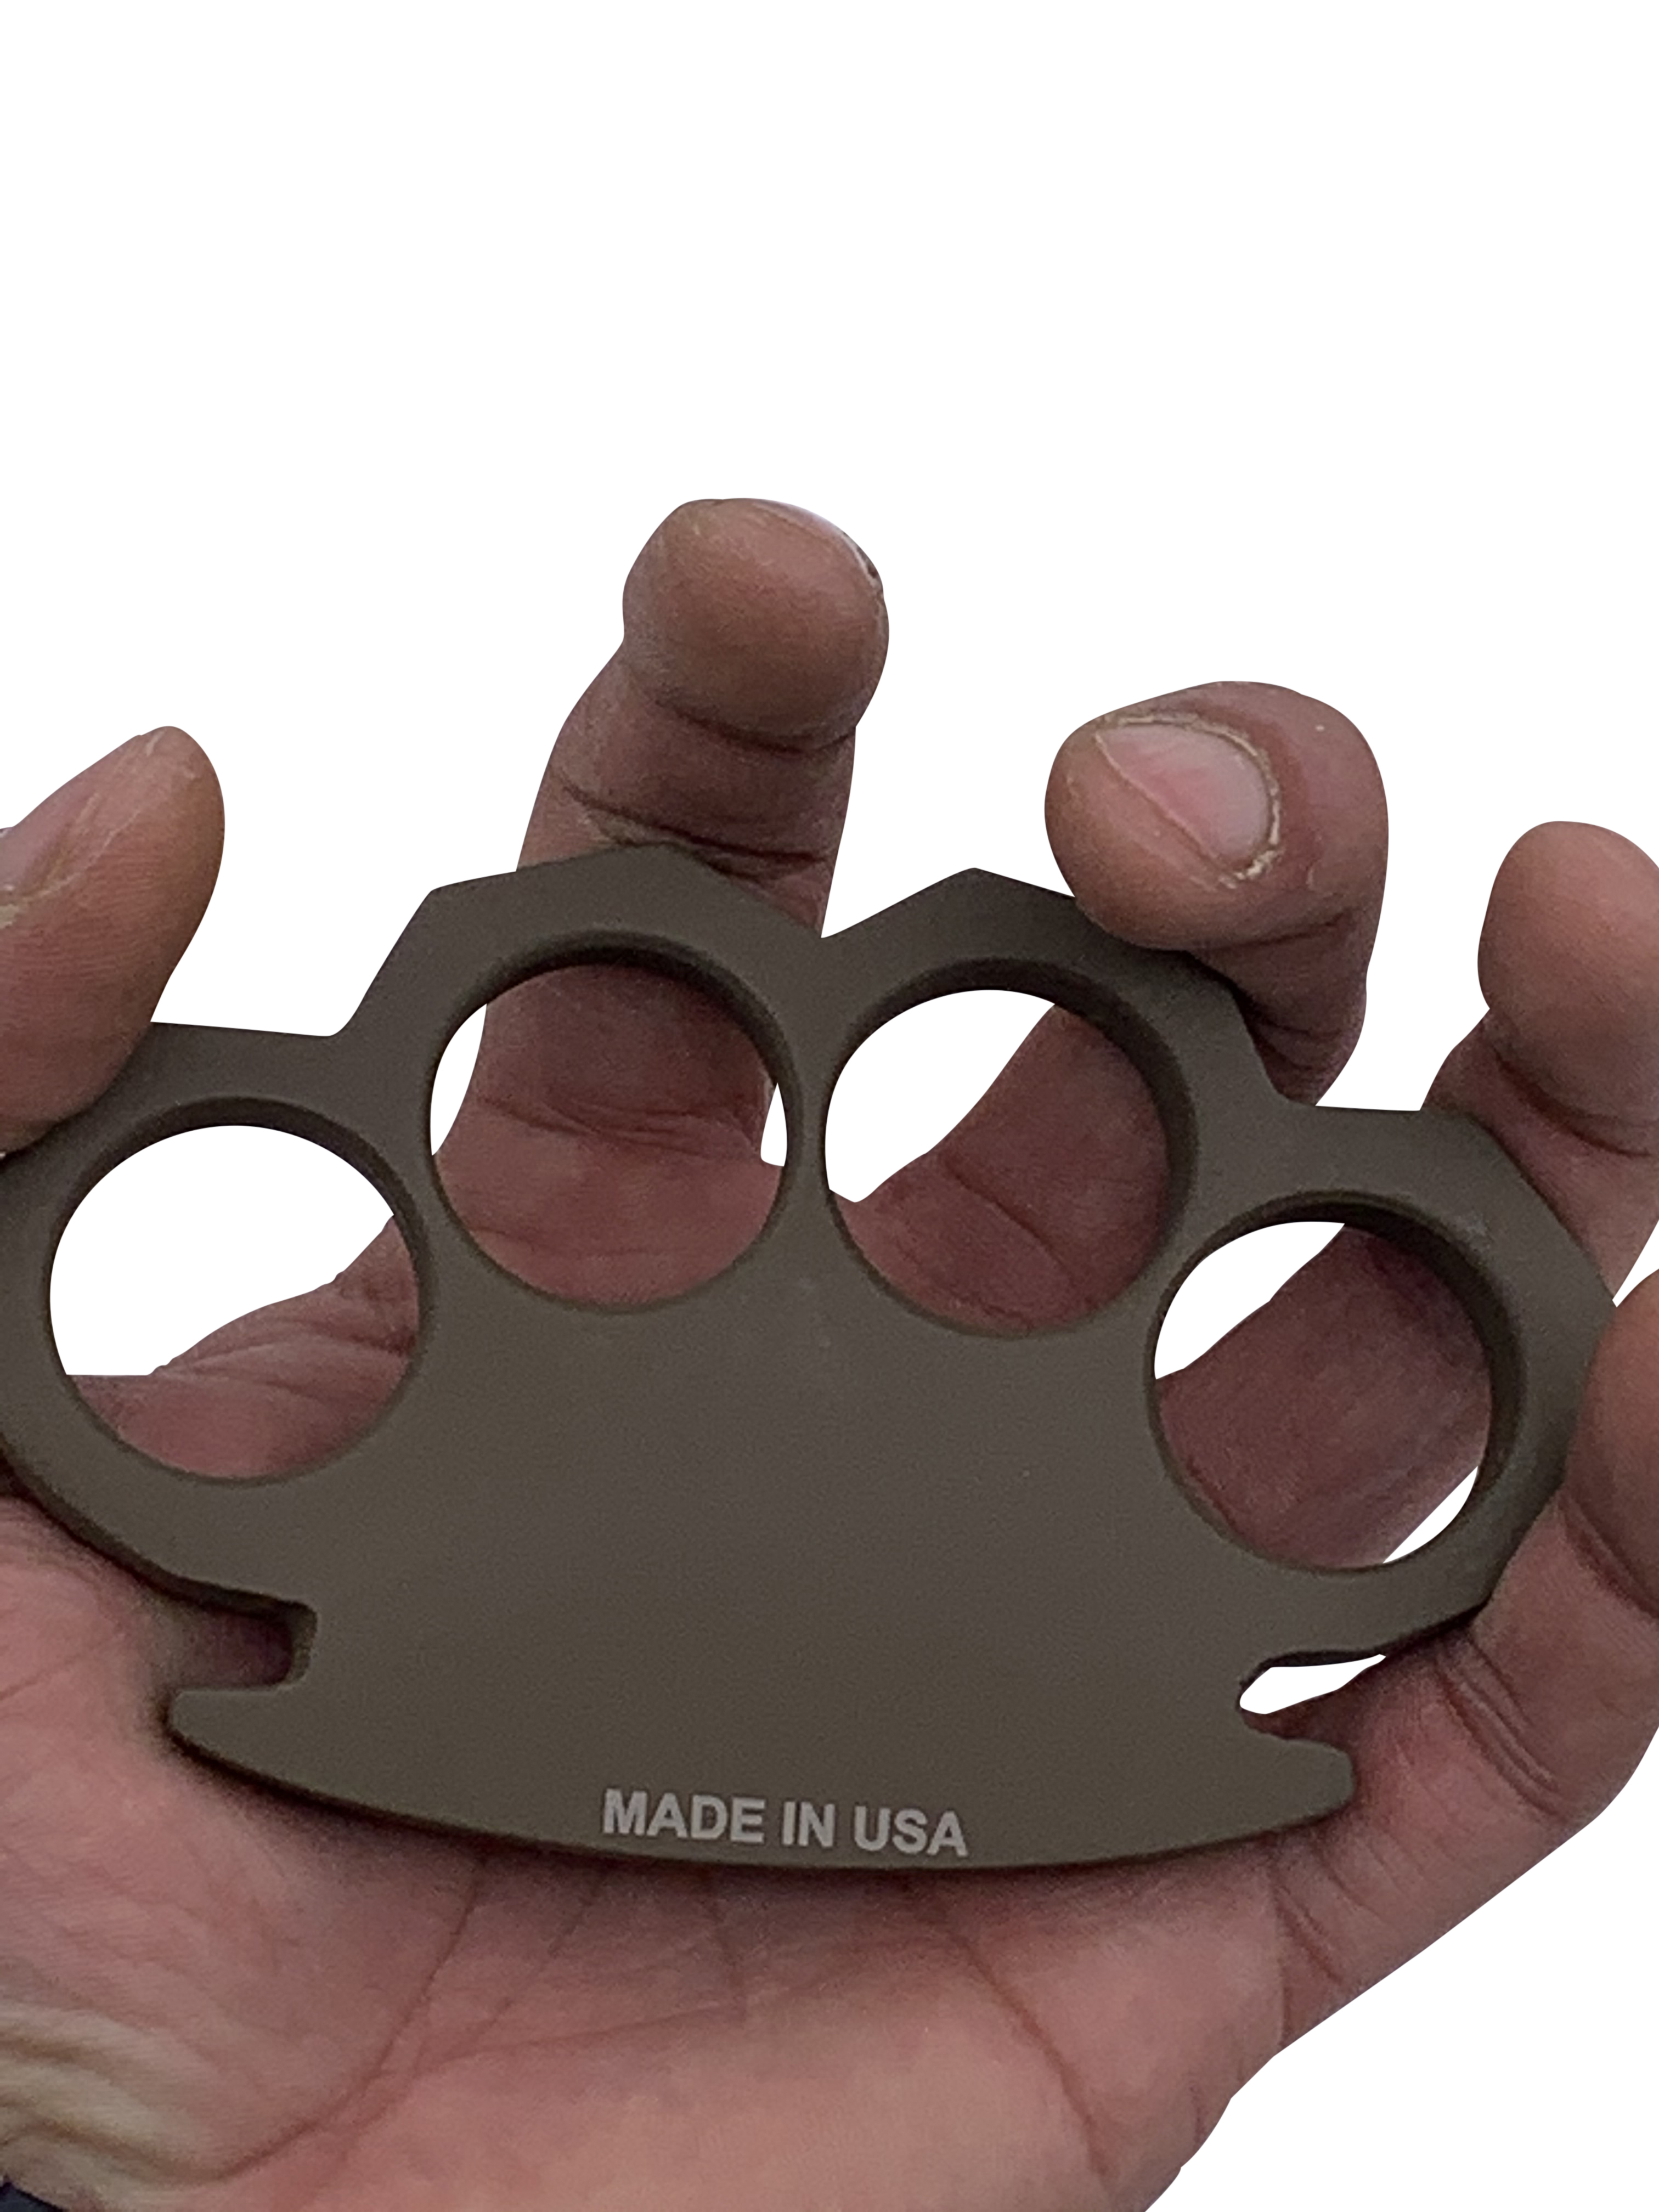 CI 300 P MGR 1 Cerakote Made in USA Brass Knuckles Military Green